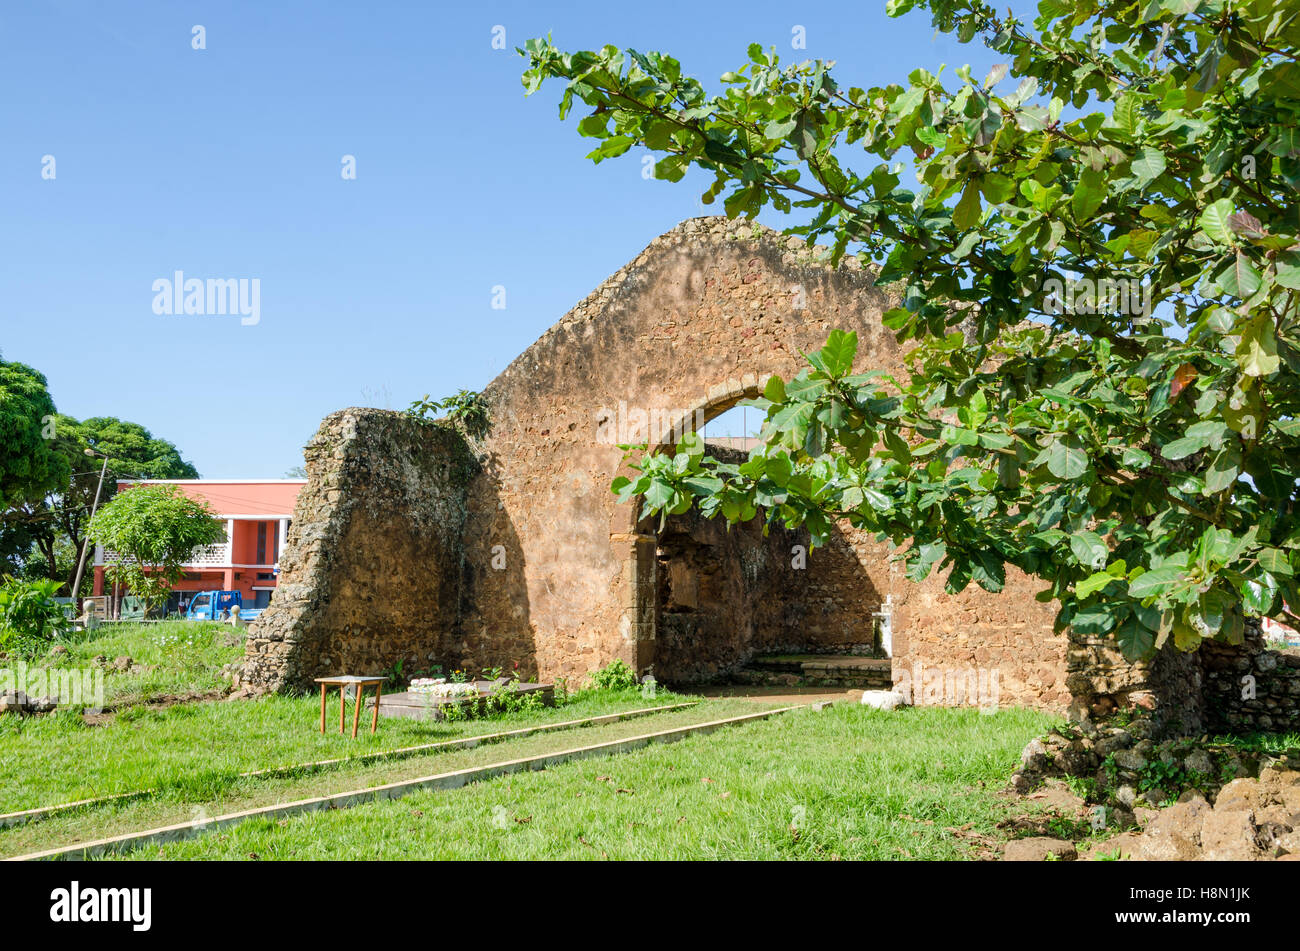 First church south of equator in Africa, Angola, M'banza Congo. The ruin is still to large parts intact today. Stock Photo